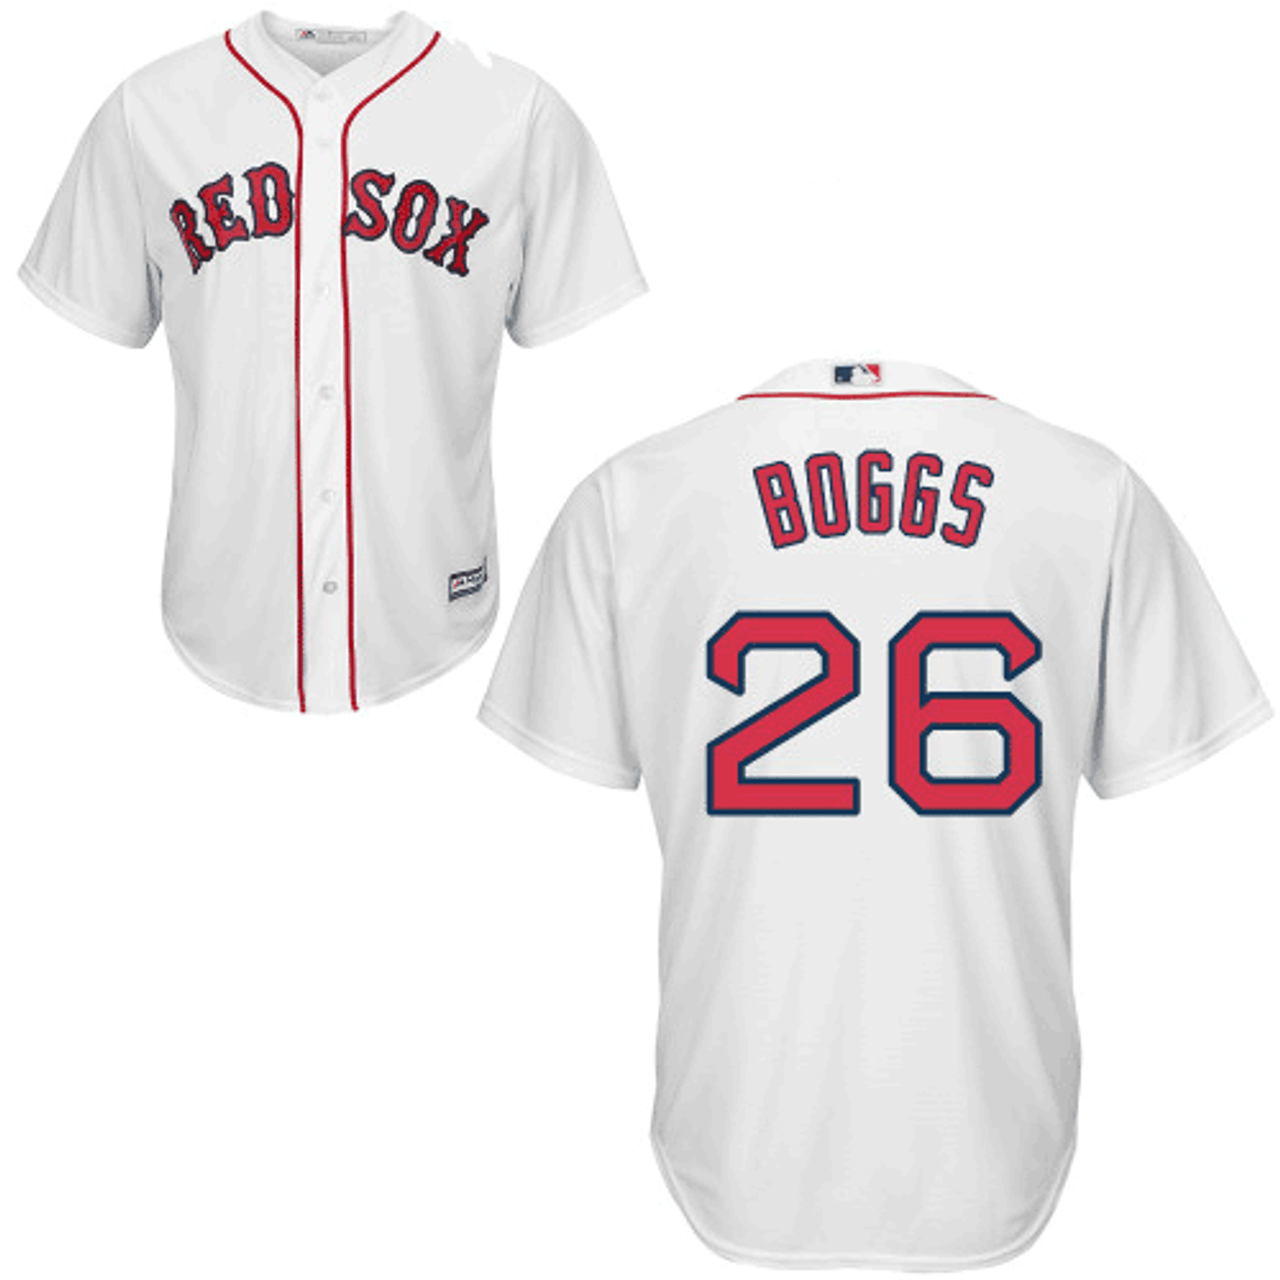 Wade Boggs Youth Jersey - Boston Red Sox Replica Kids Home